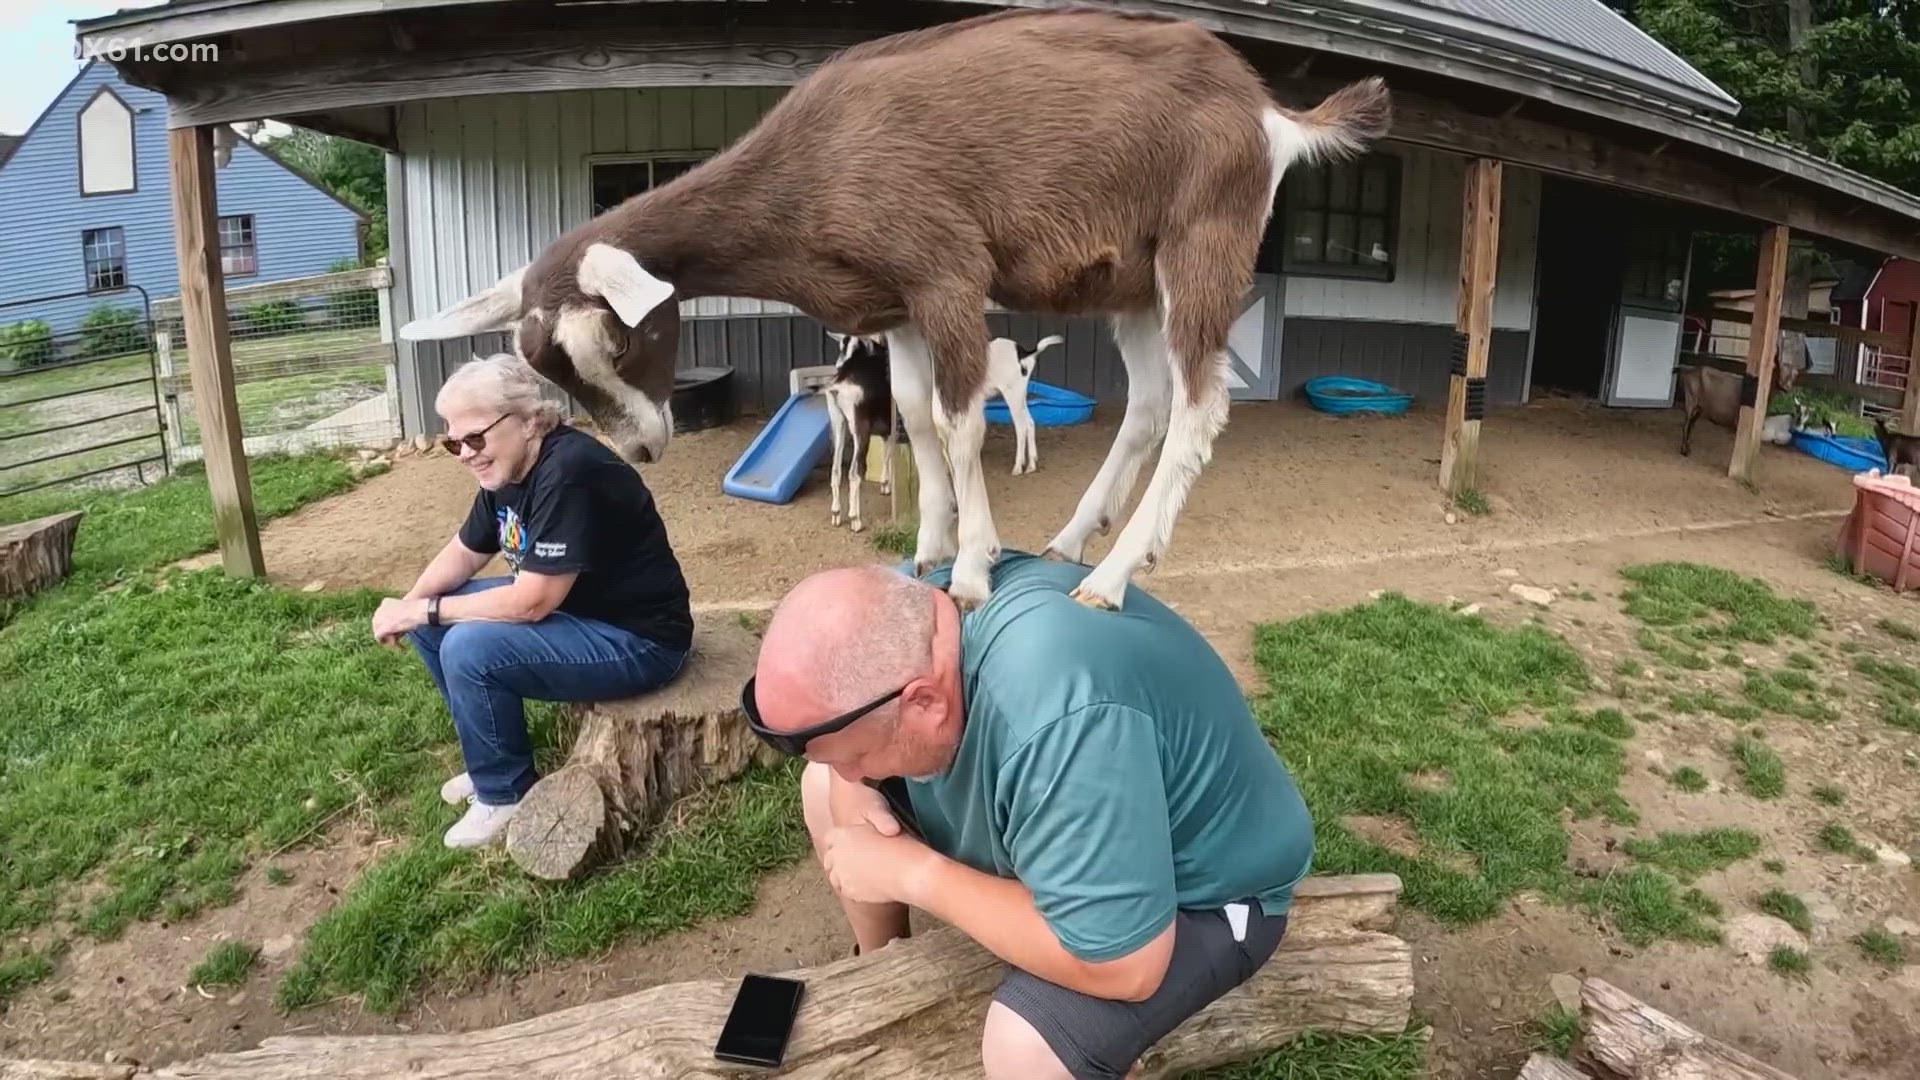 A family farm business in Salem has gone to the goats, and the public is picking up on all of it.